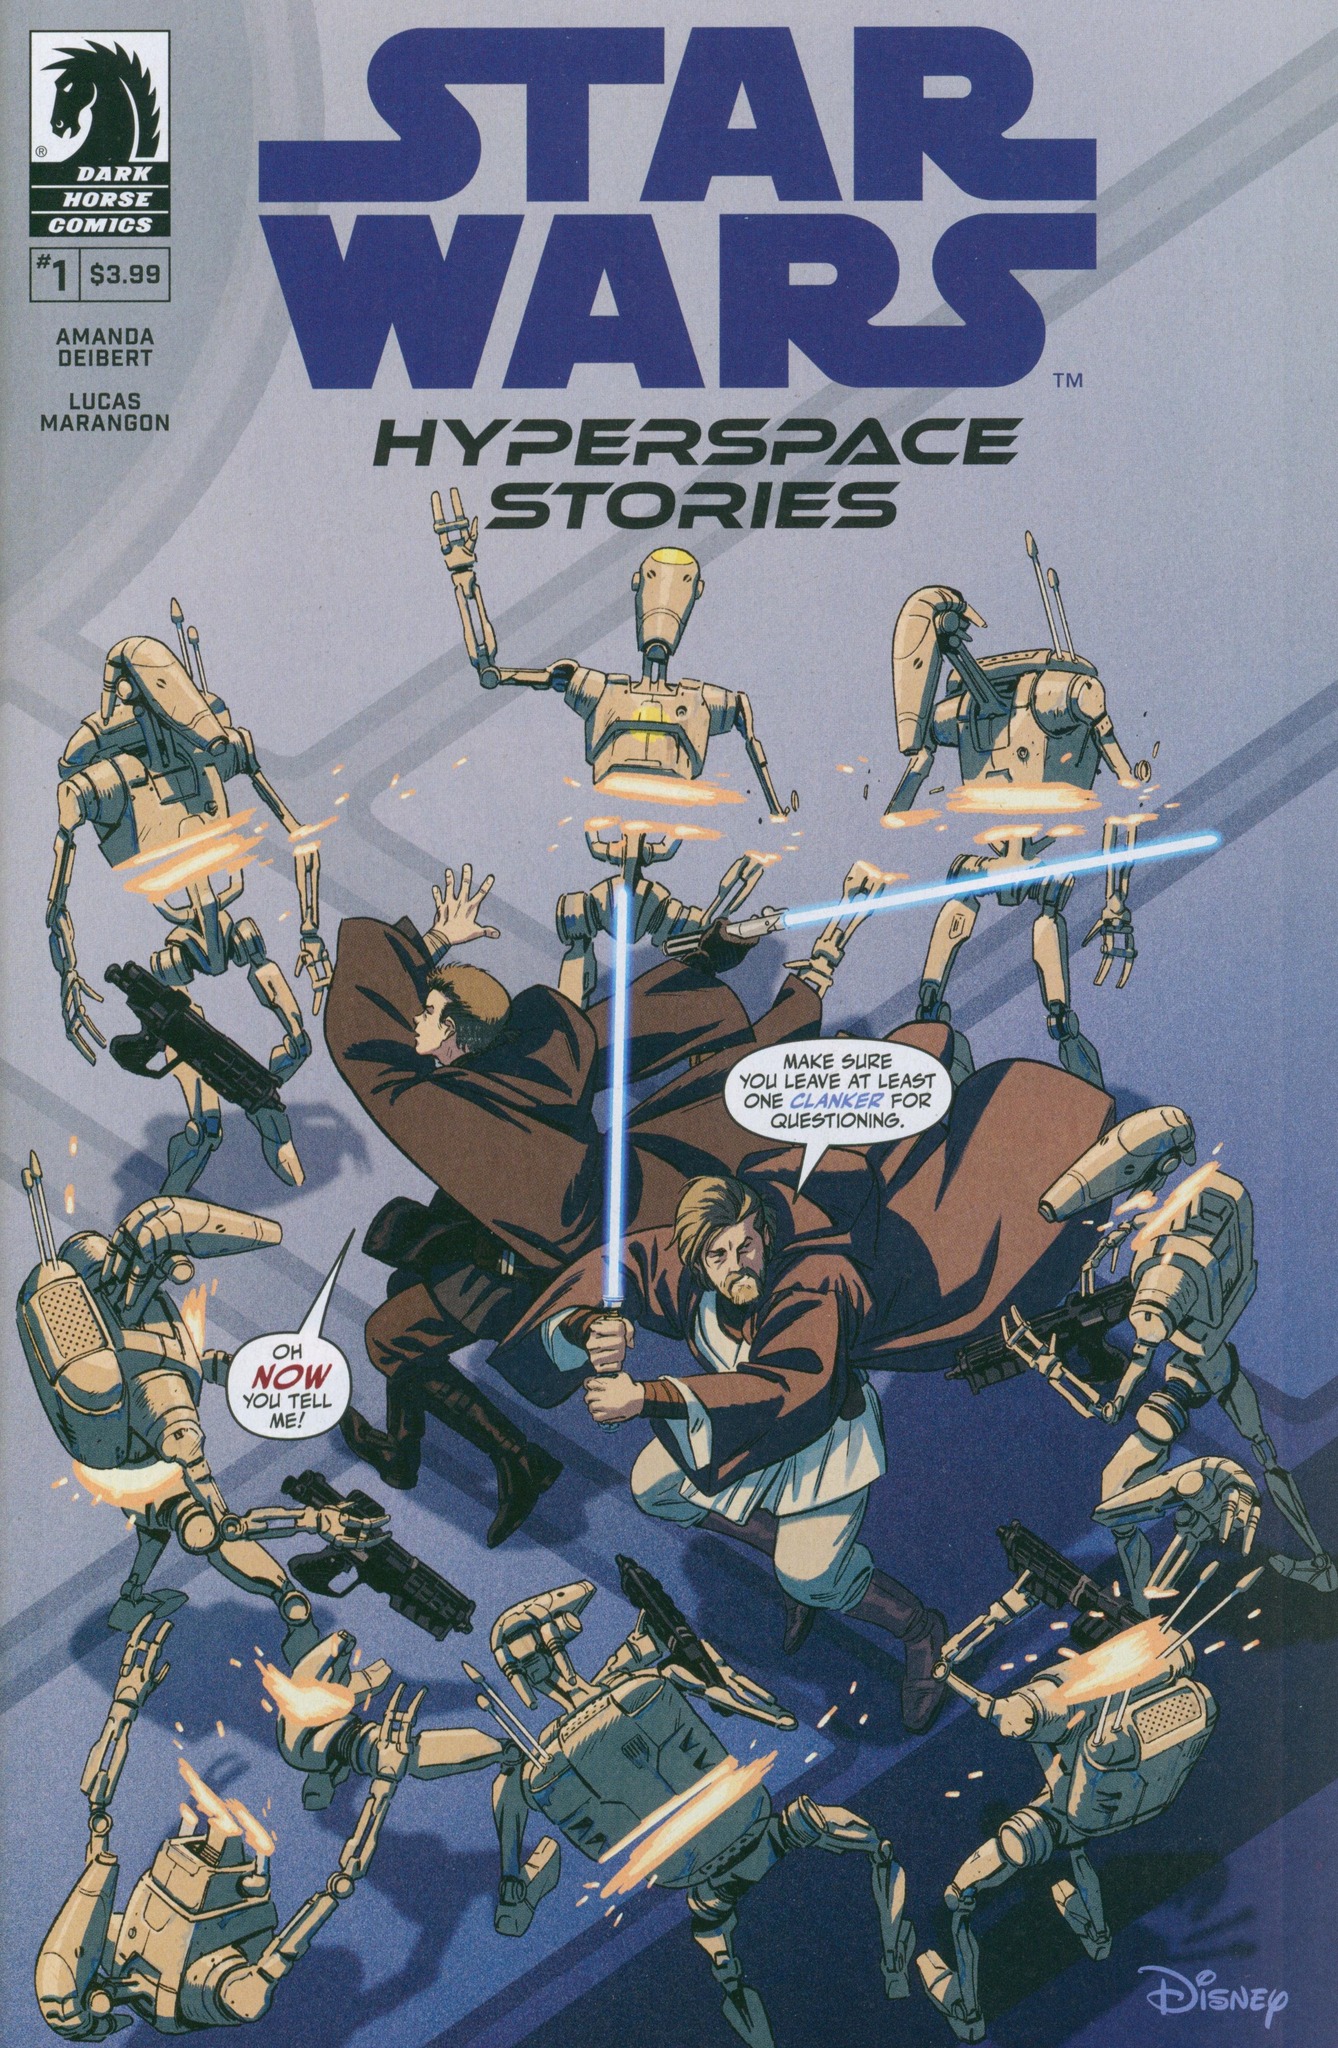 Hyperspace Stories #1 (Cover B by Miguel Valderrama) (10.08.2022)